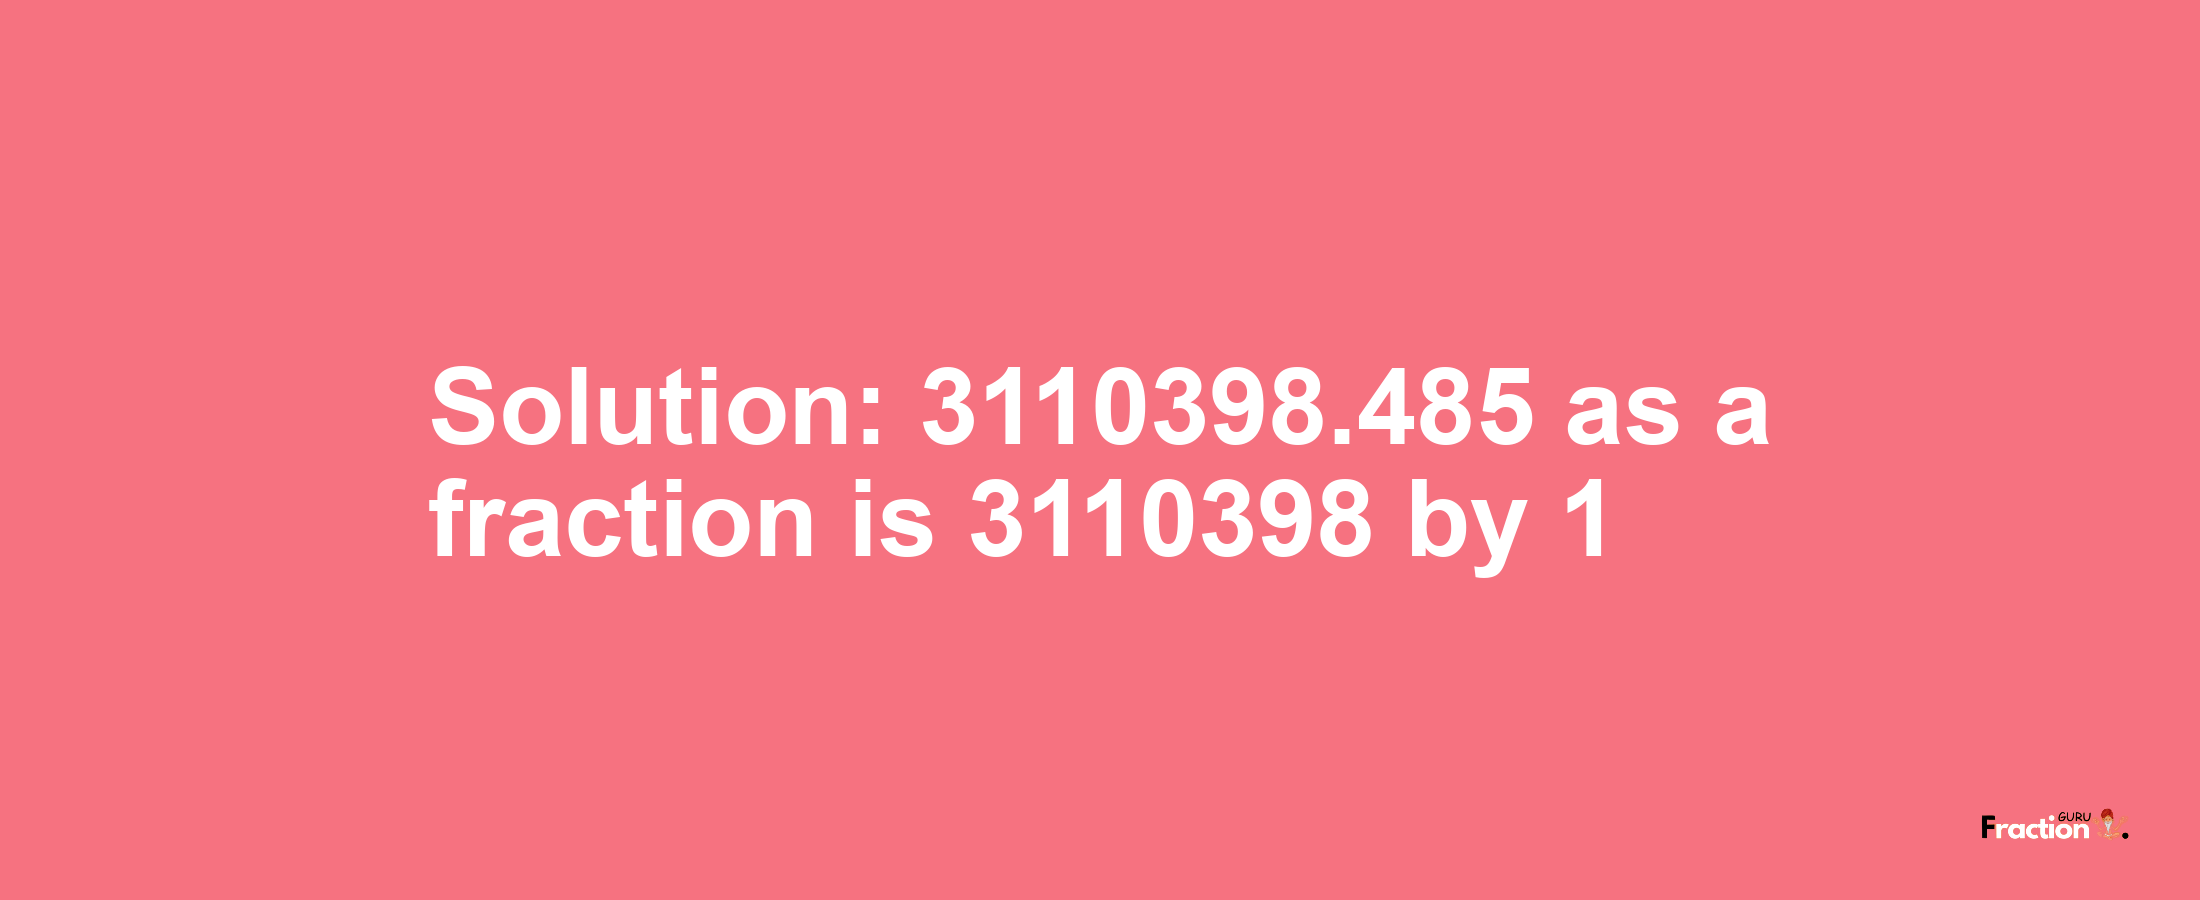 Solution:3110398.485 as a fraction is 3110398/1